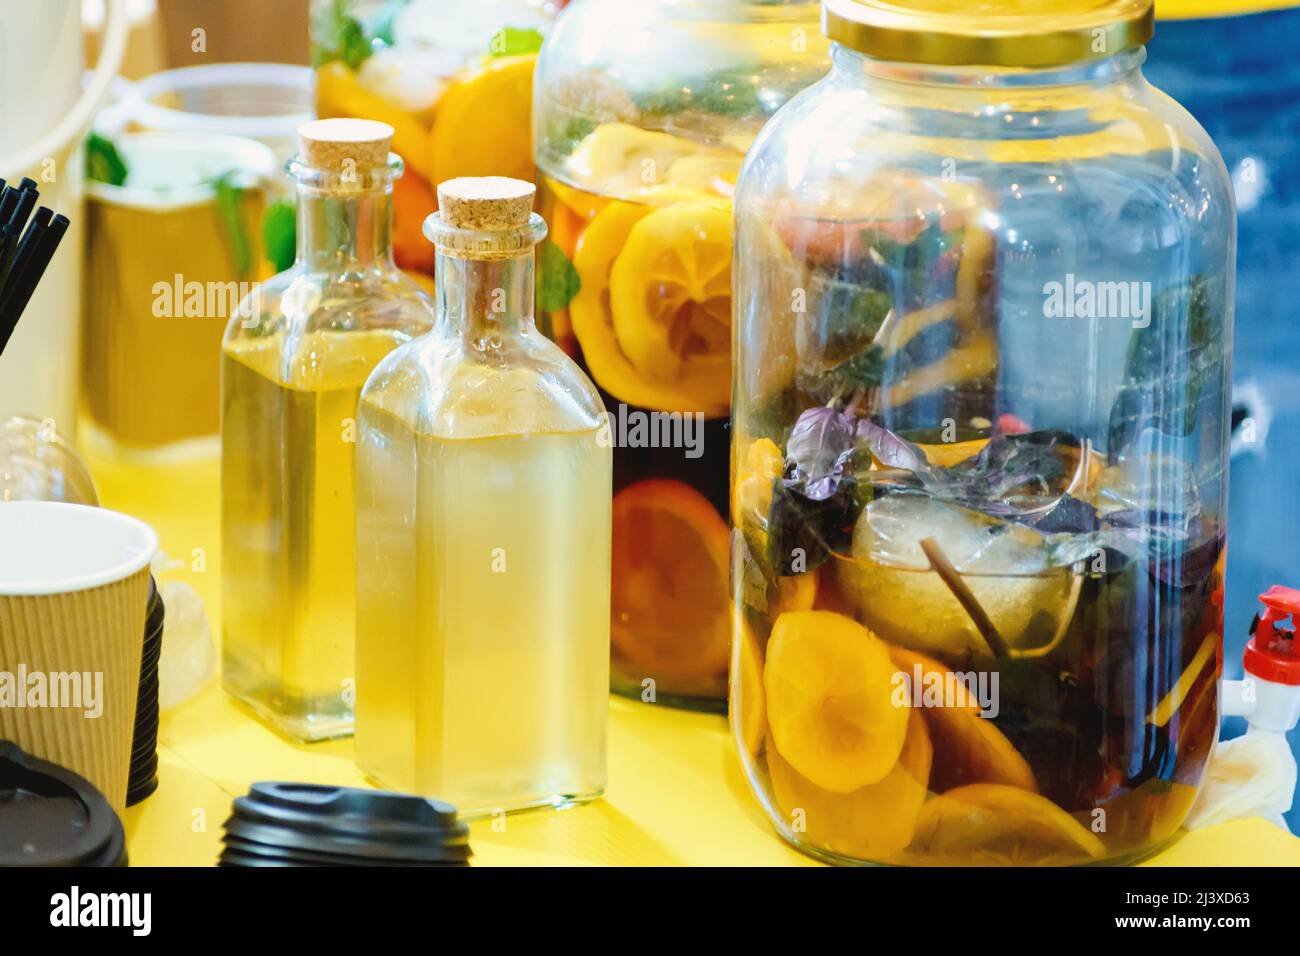 Medicinal drink made from fruits and herbs Stock Photo